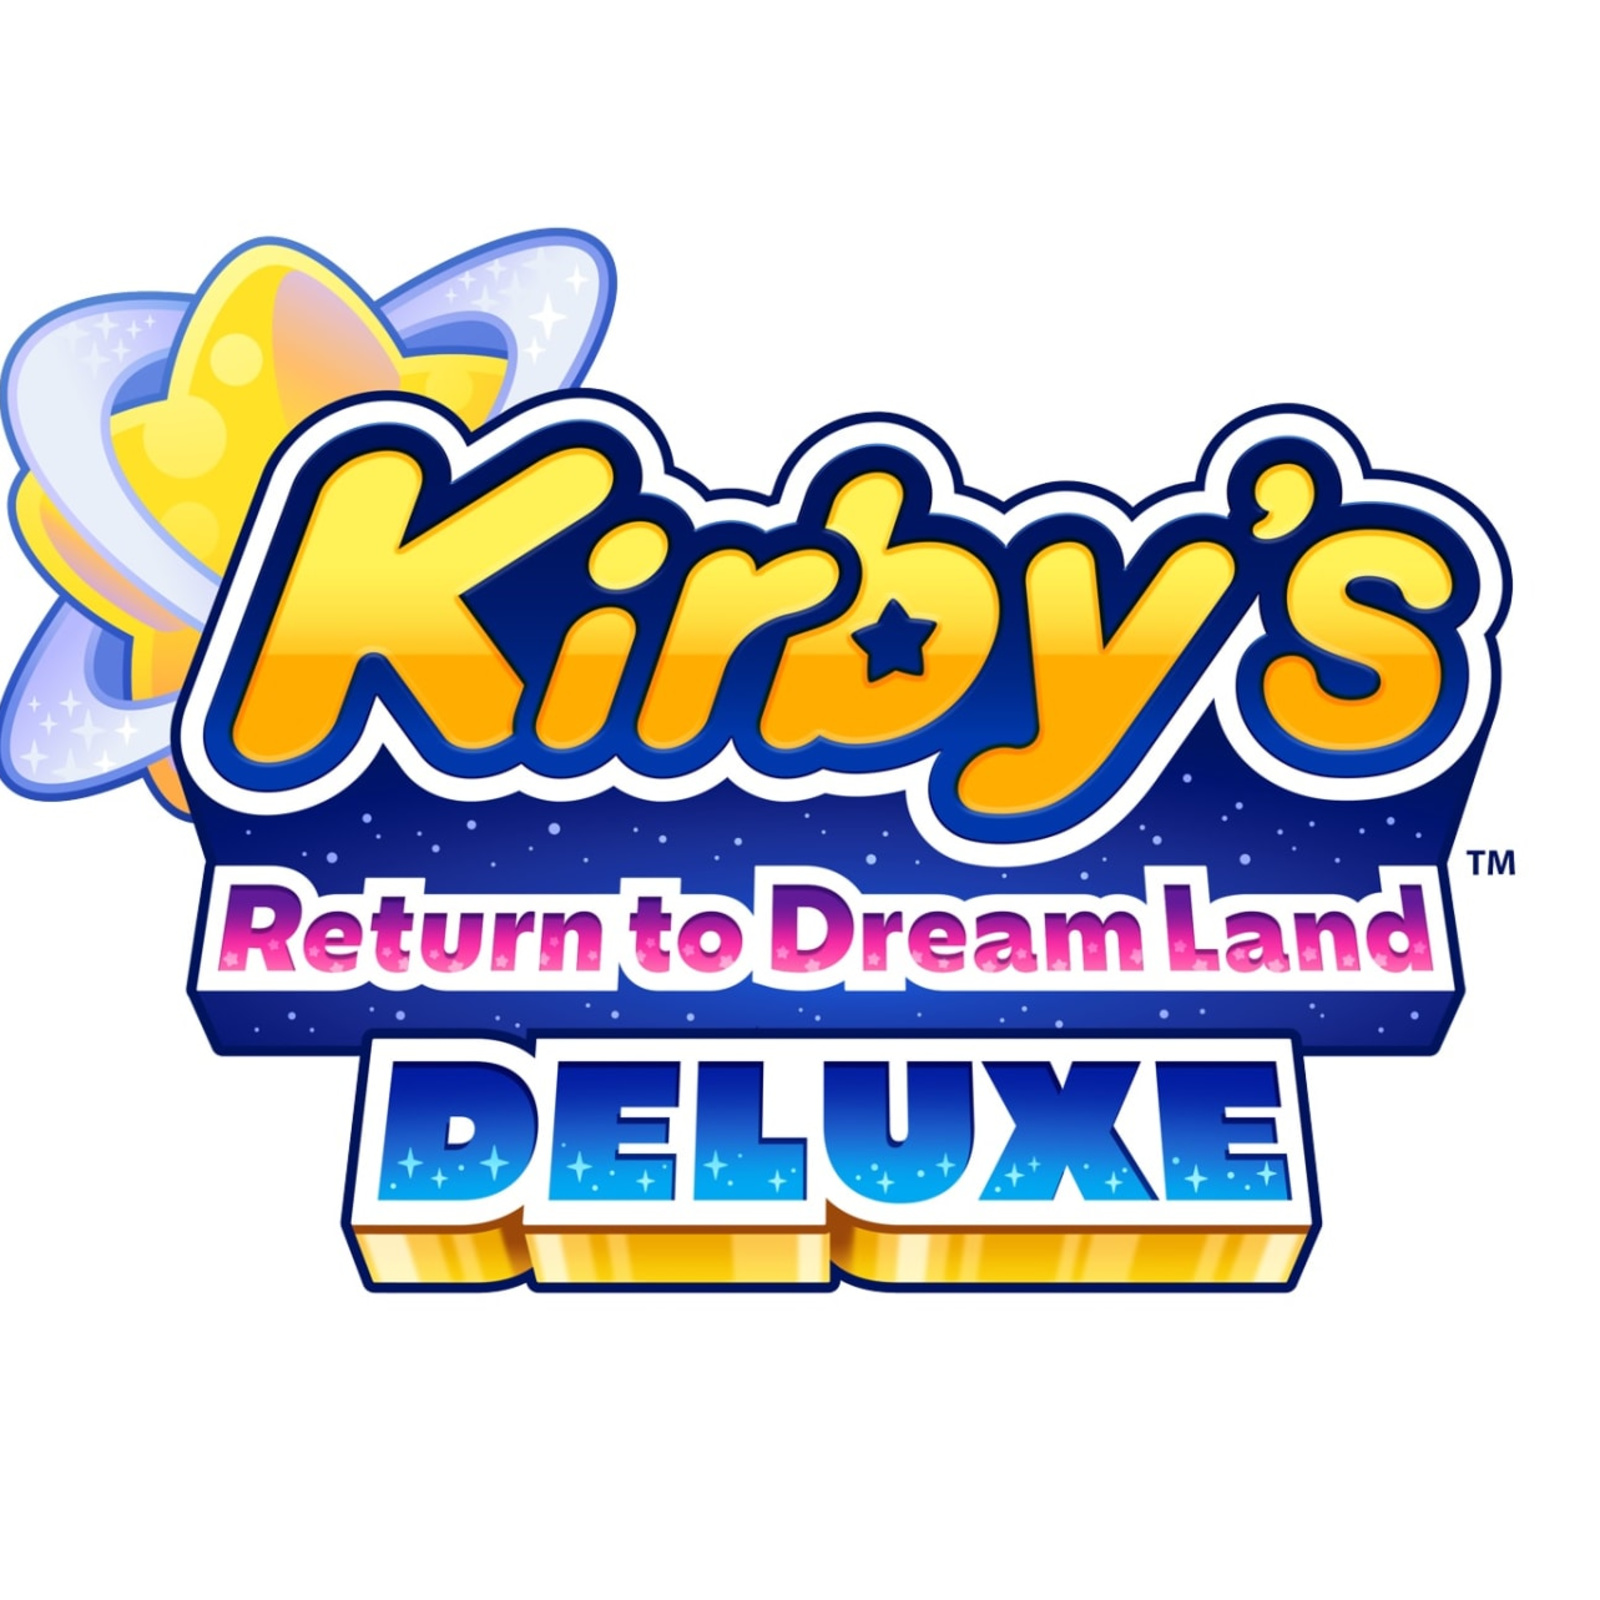 Kirby's Return to Dream Land Deluxe review for Nintendo Switch